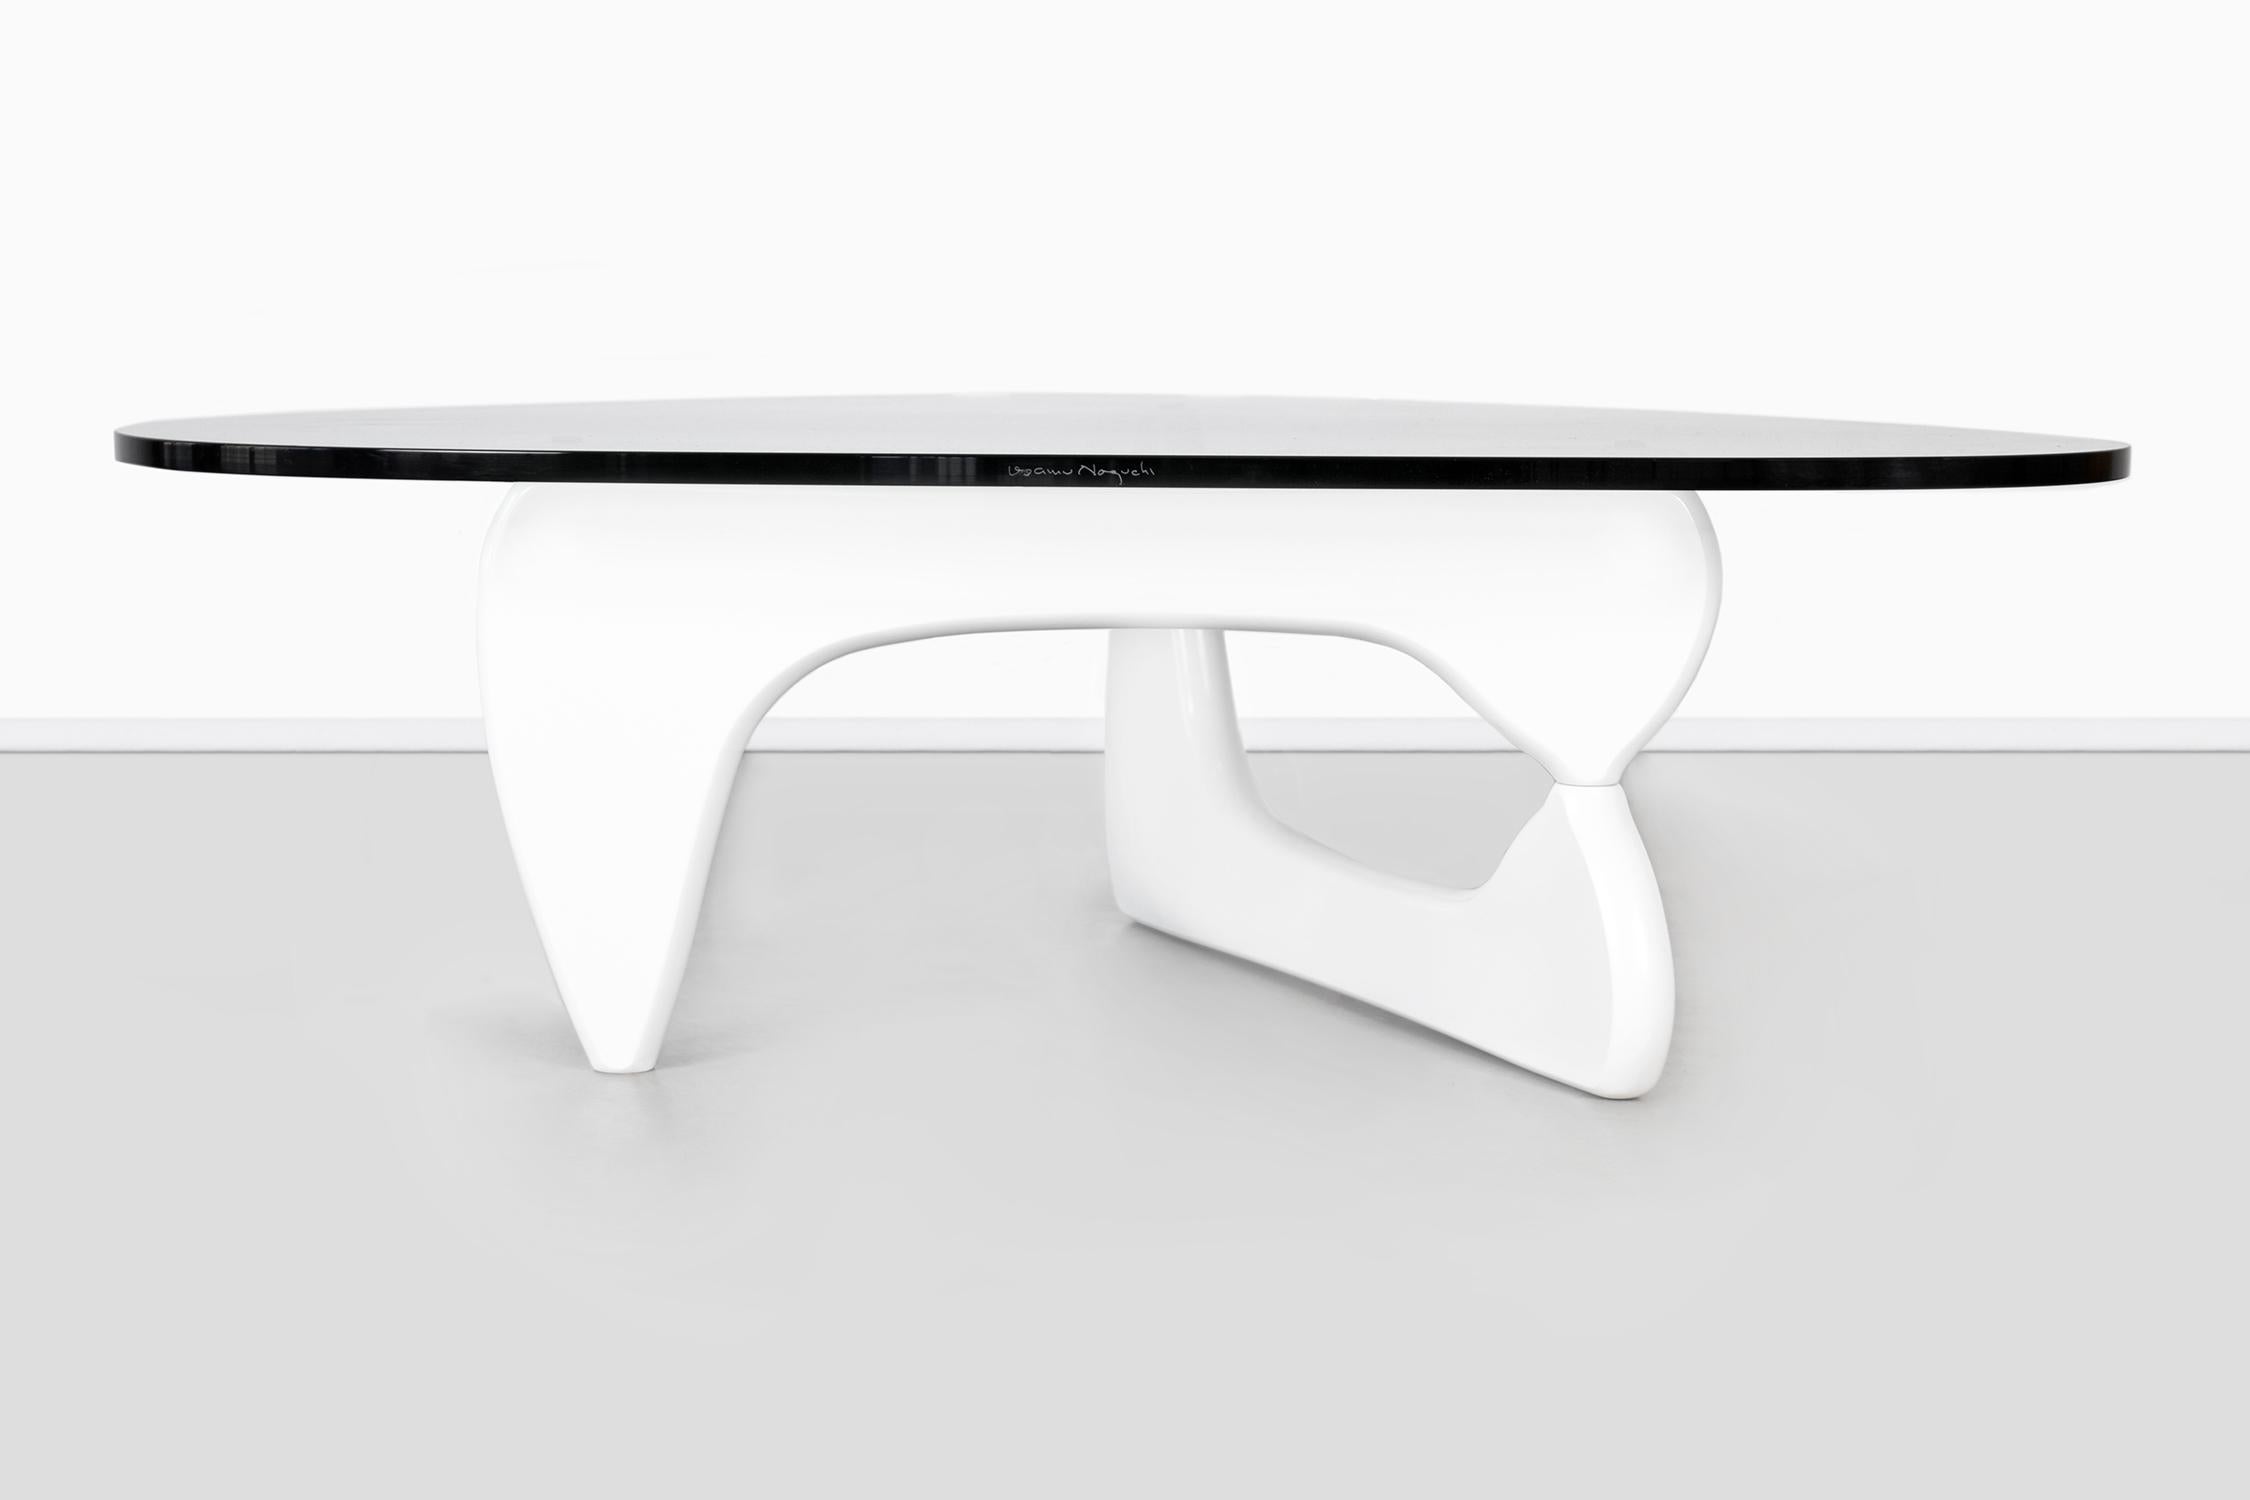 Coffee table

Designed by Isamu Noguchi for Herman Miller

USA, circa 1990s

Wood and glass

Measures: 15 ¾” H x 40 ¾” W x 50”? D

This authentic table has Noguchi’s signature etched into the side of the glass with the manufacturer’s